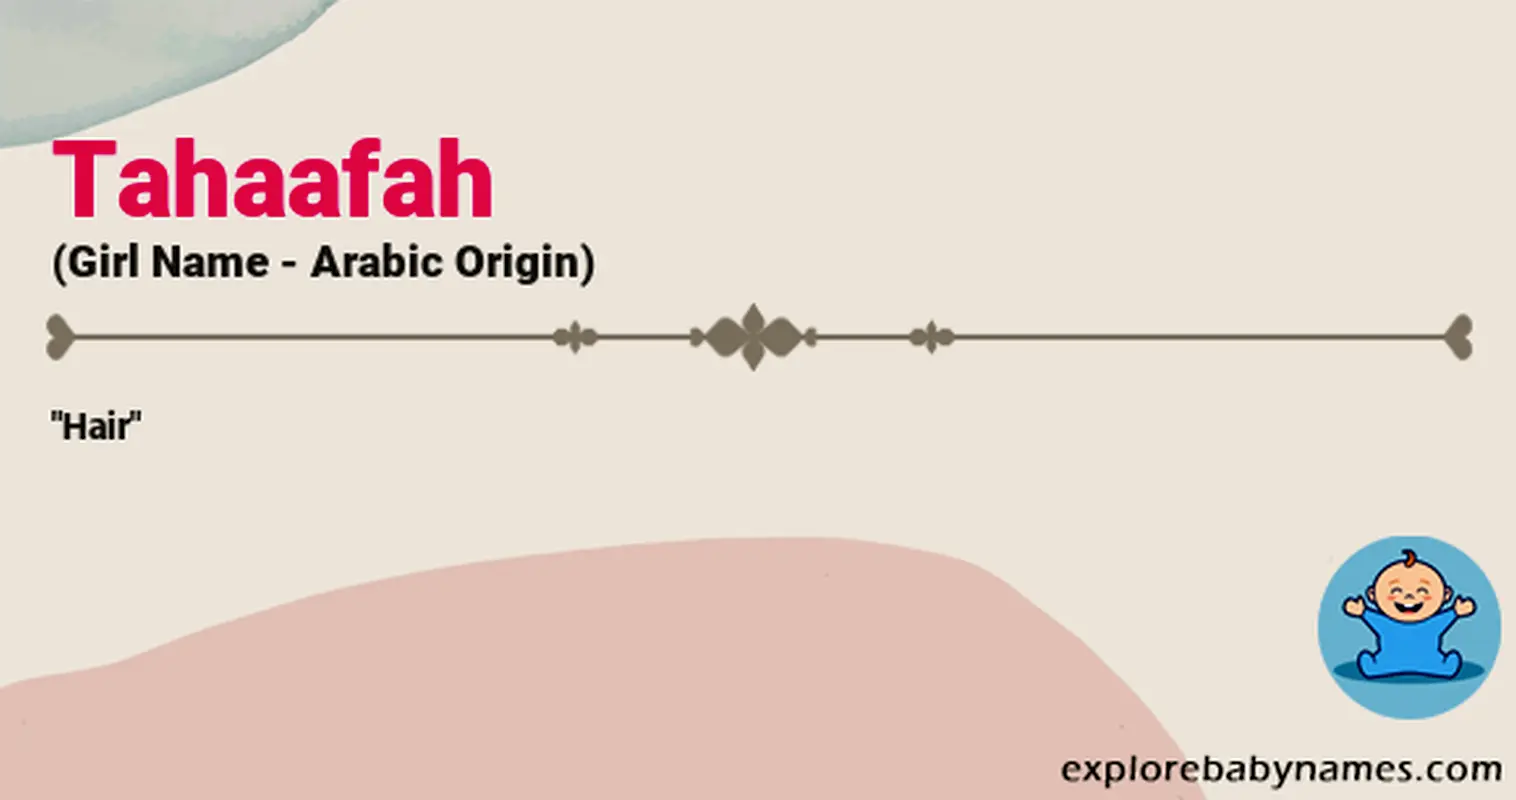 Meaning of Tahaafah